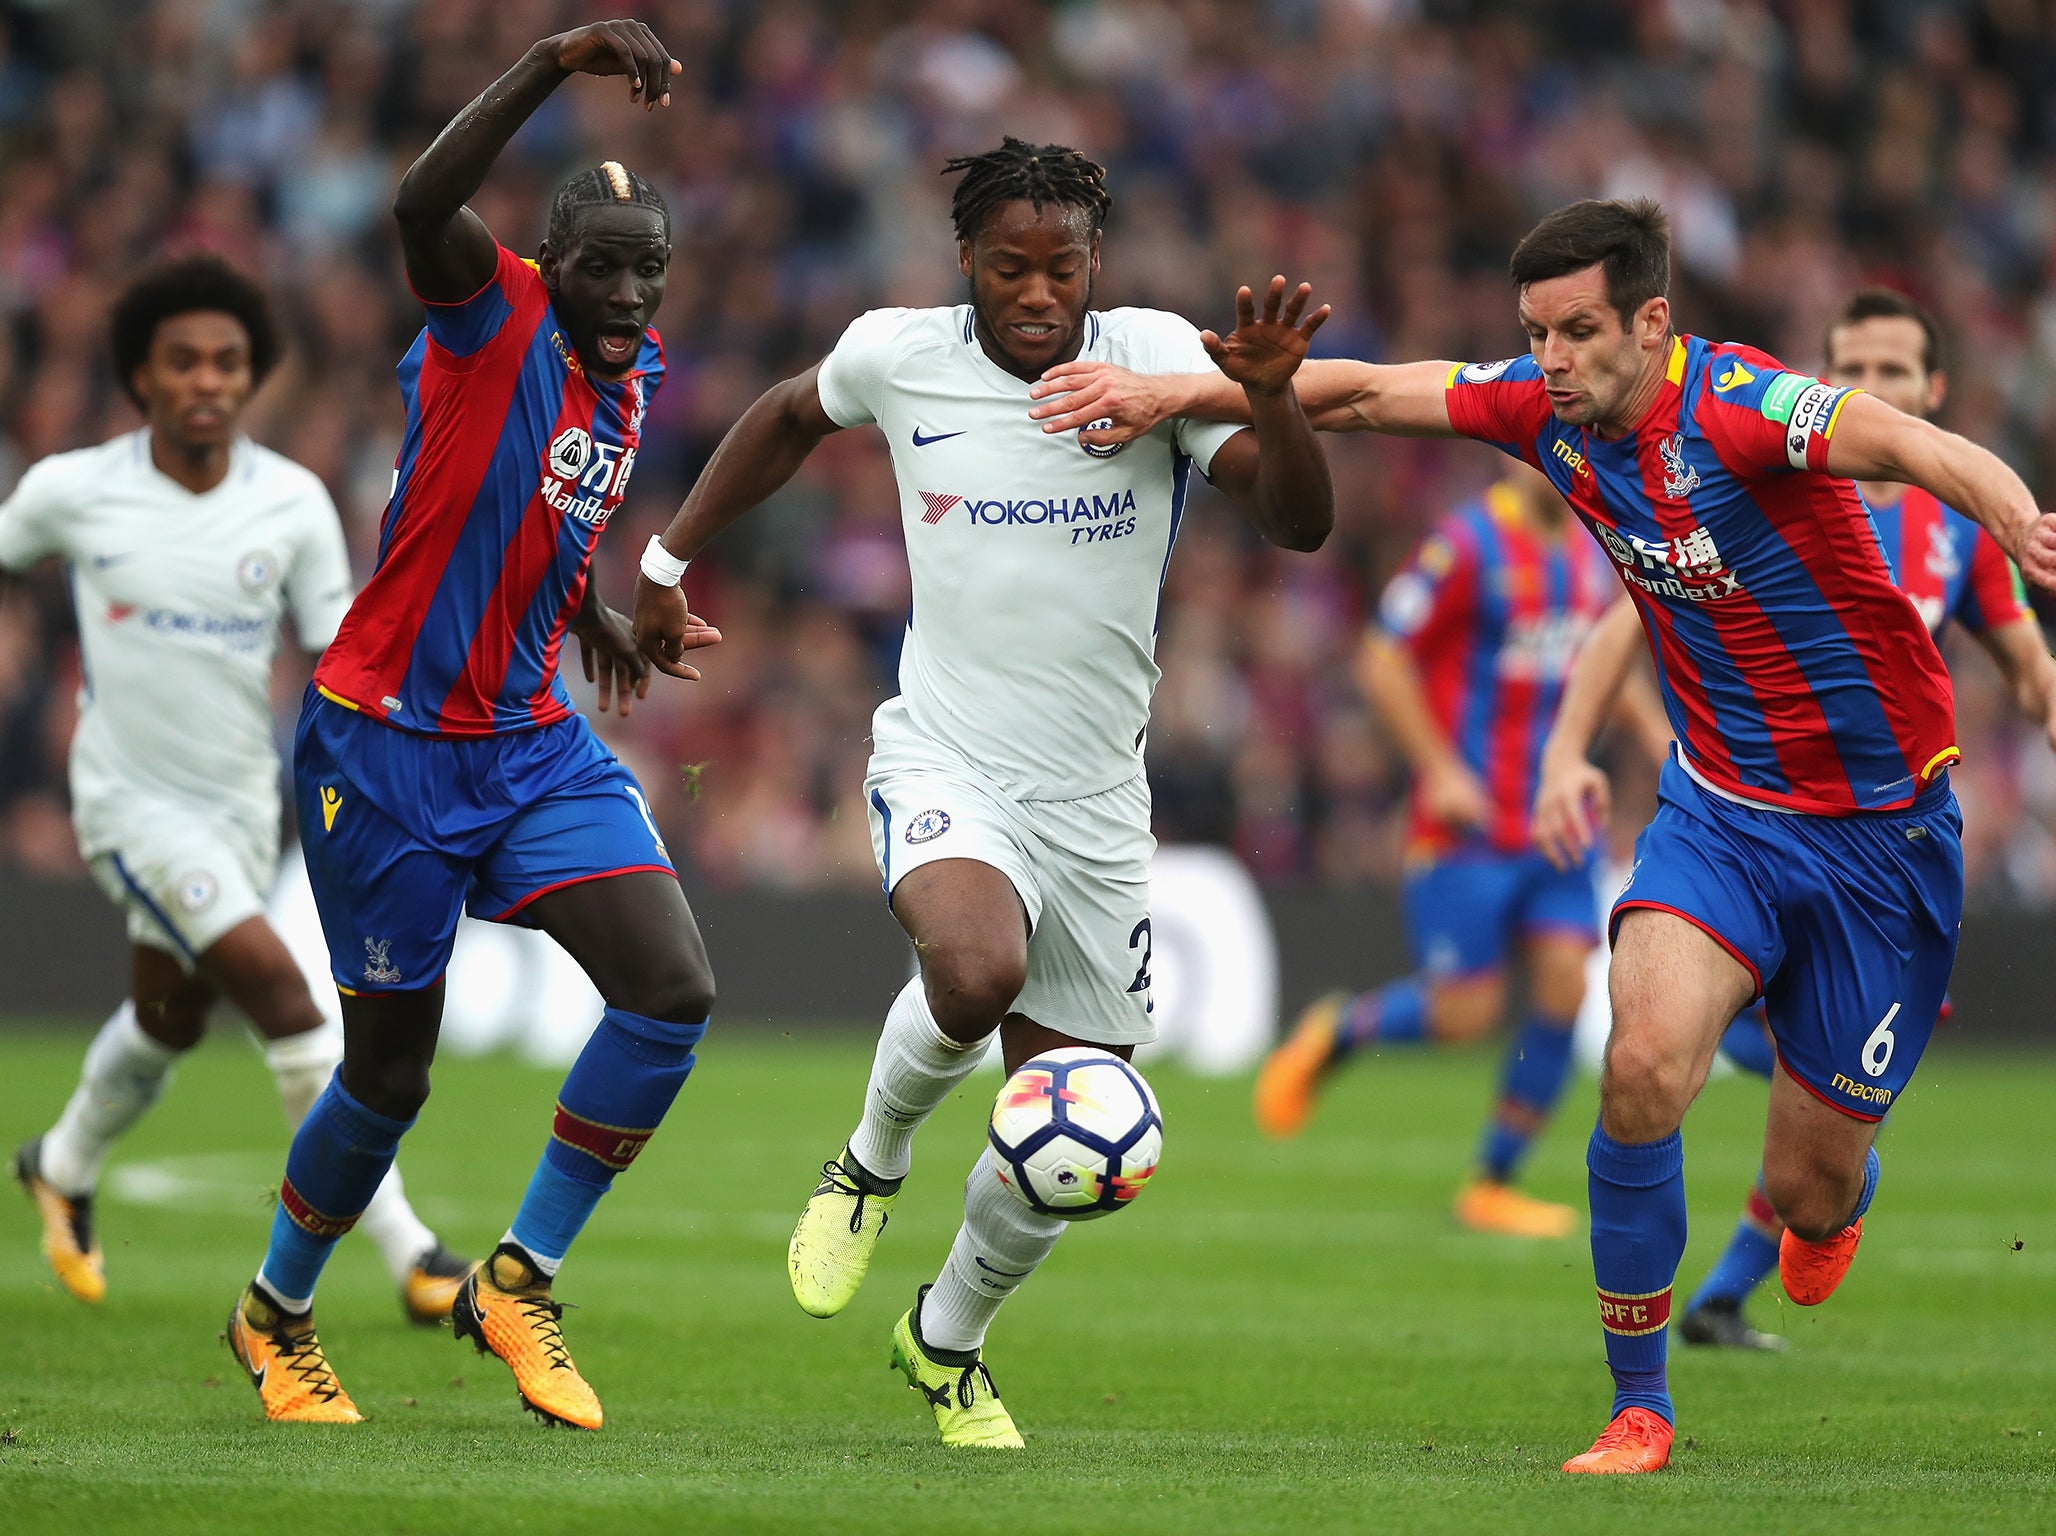 Batshuayi continues to struggle up front for Chelsea